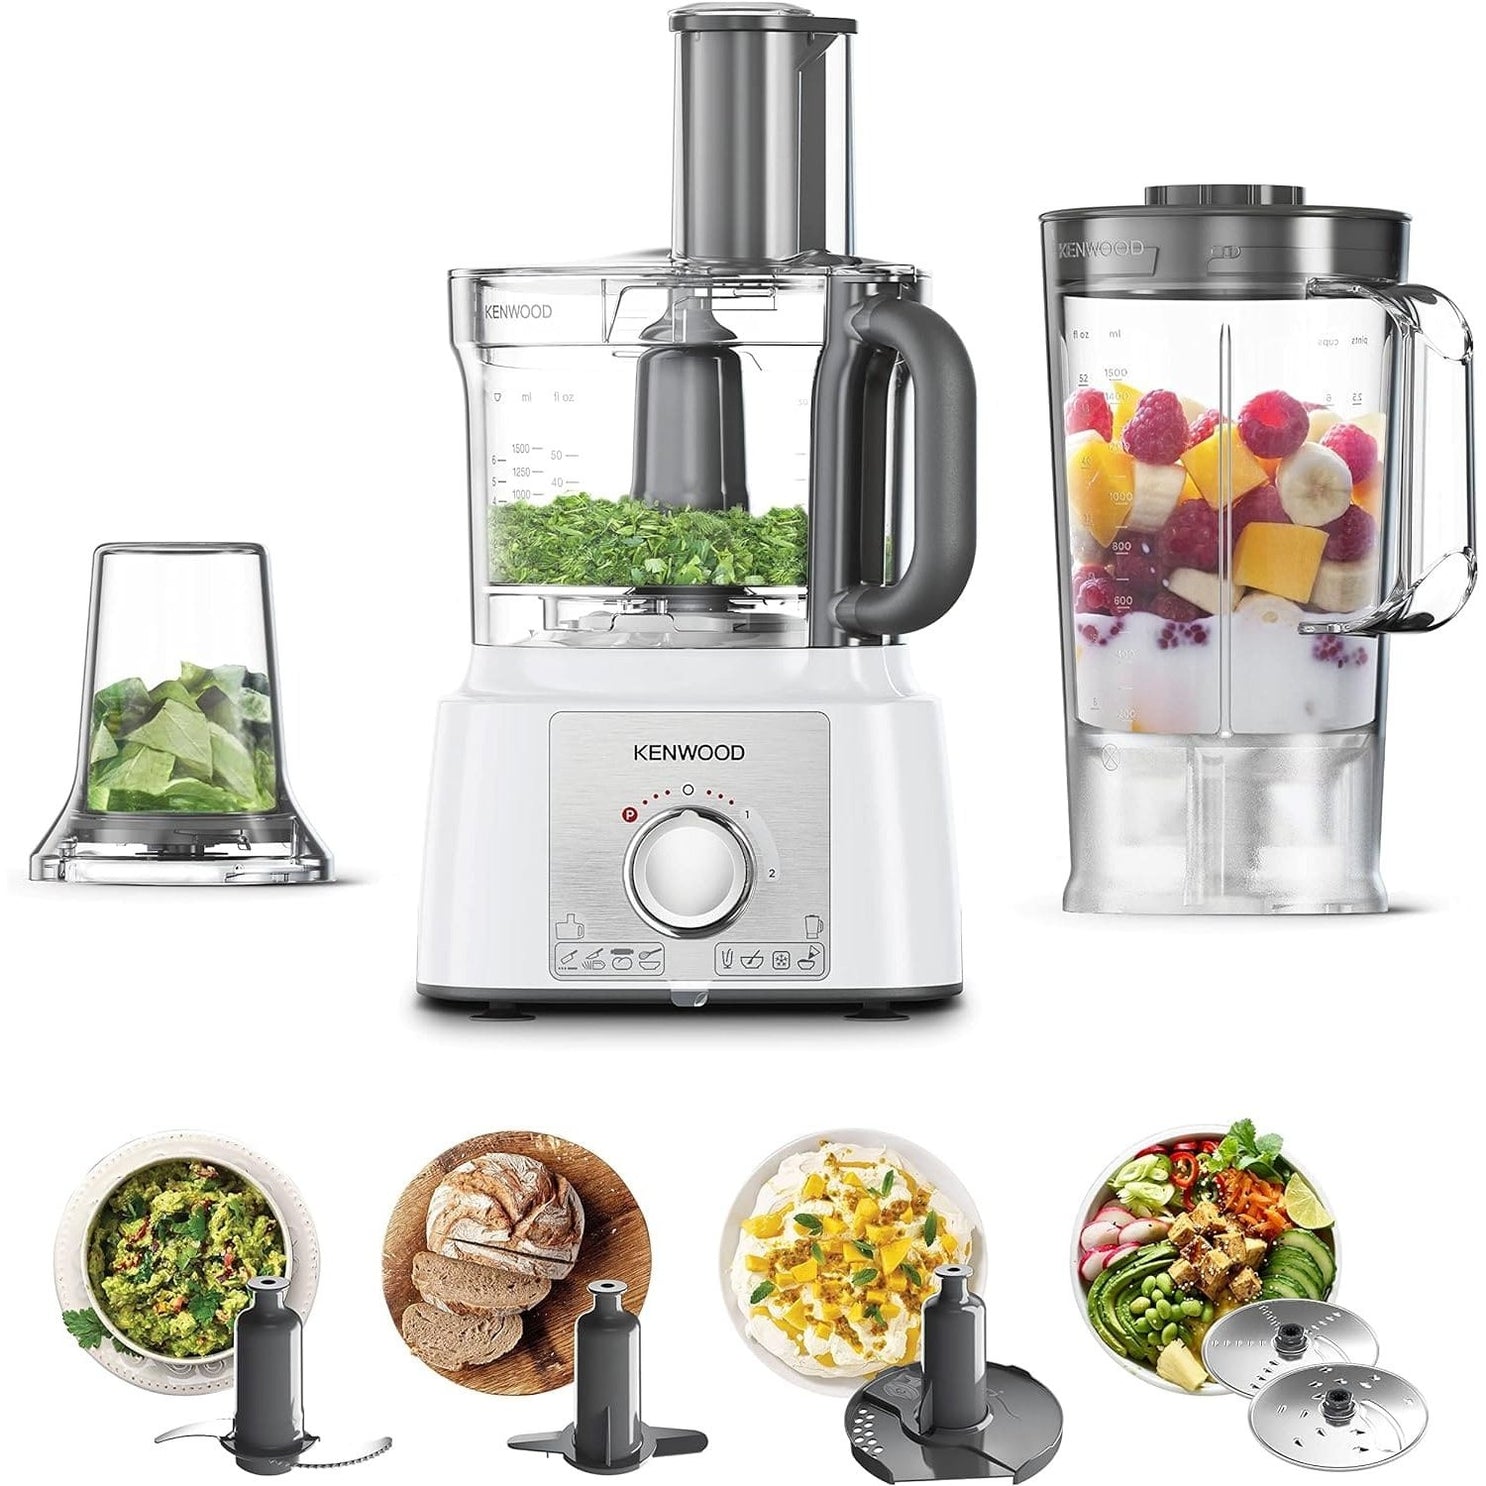 Kenwood Food Processor 600W - FDP65.400WH | Supply Master Accra, Ghana Kitchen Appliances Buy Tools hardware Building materials